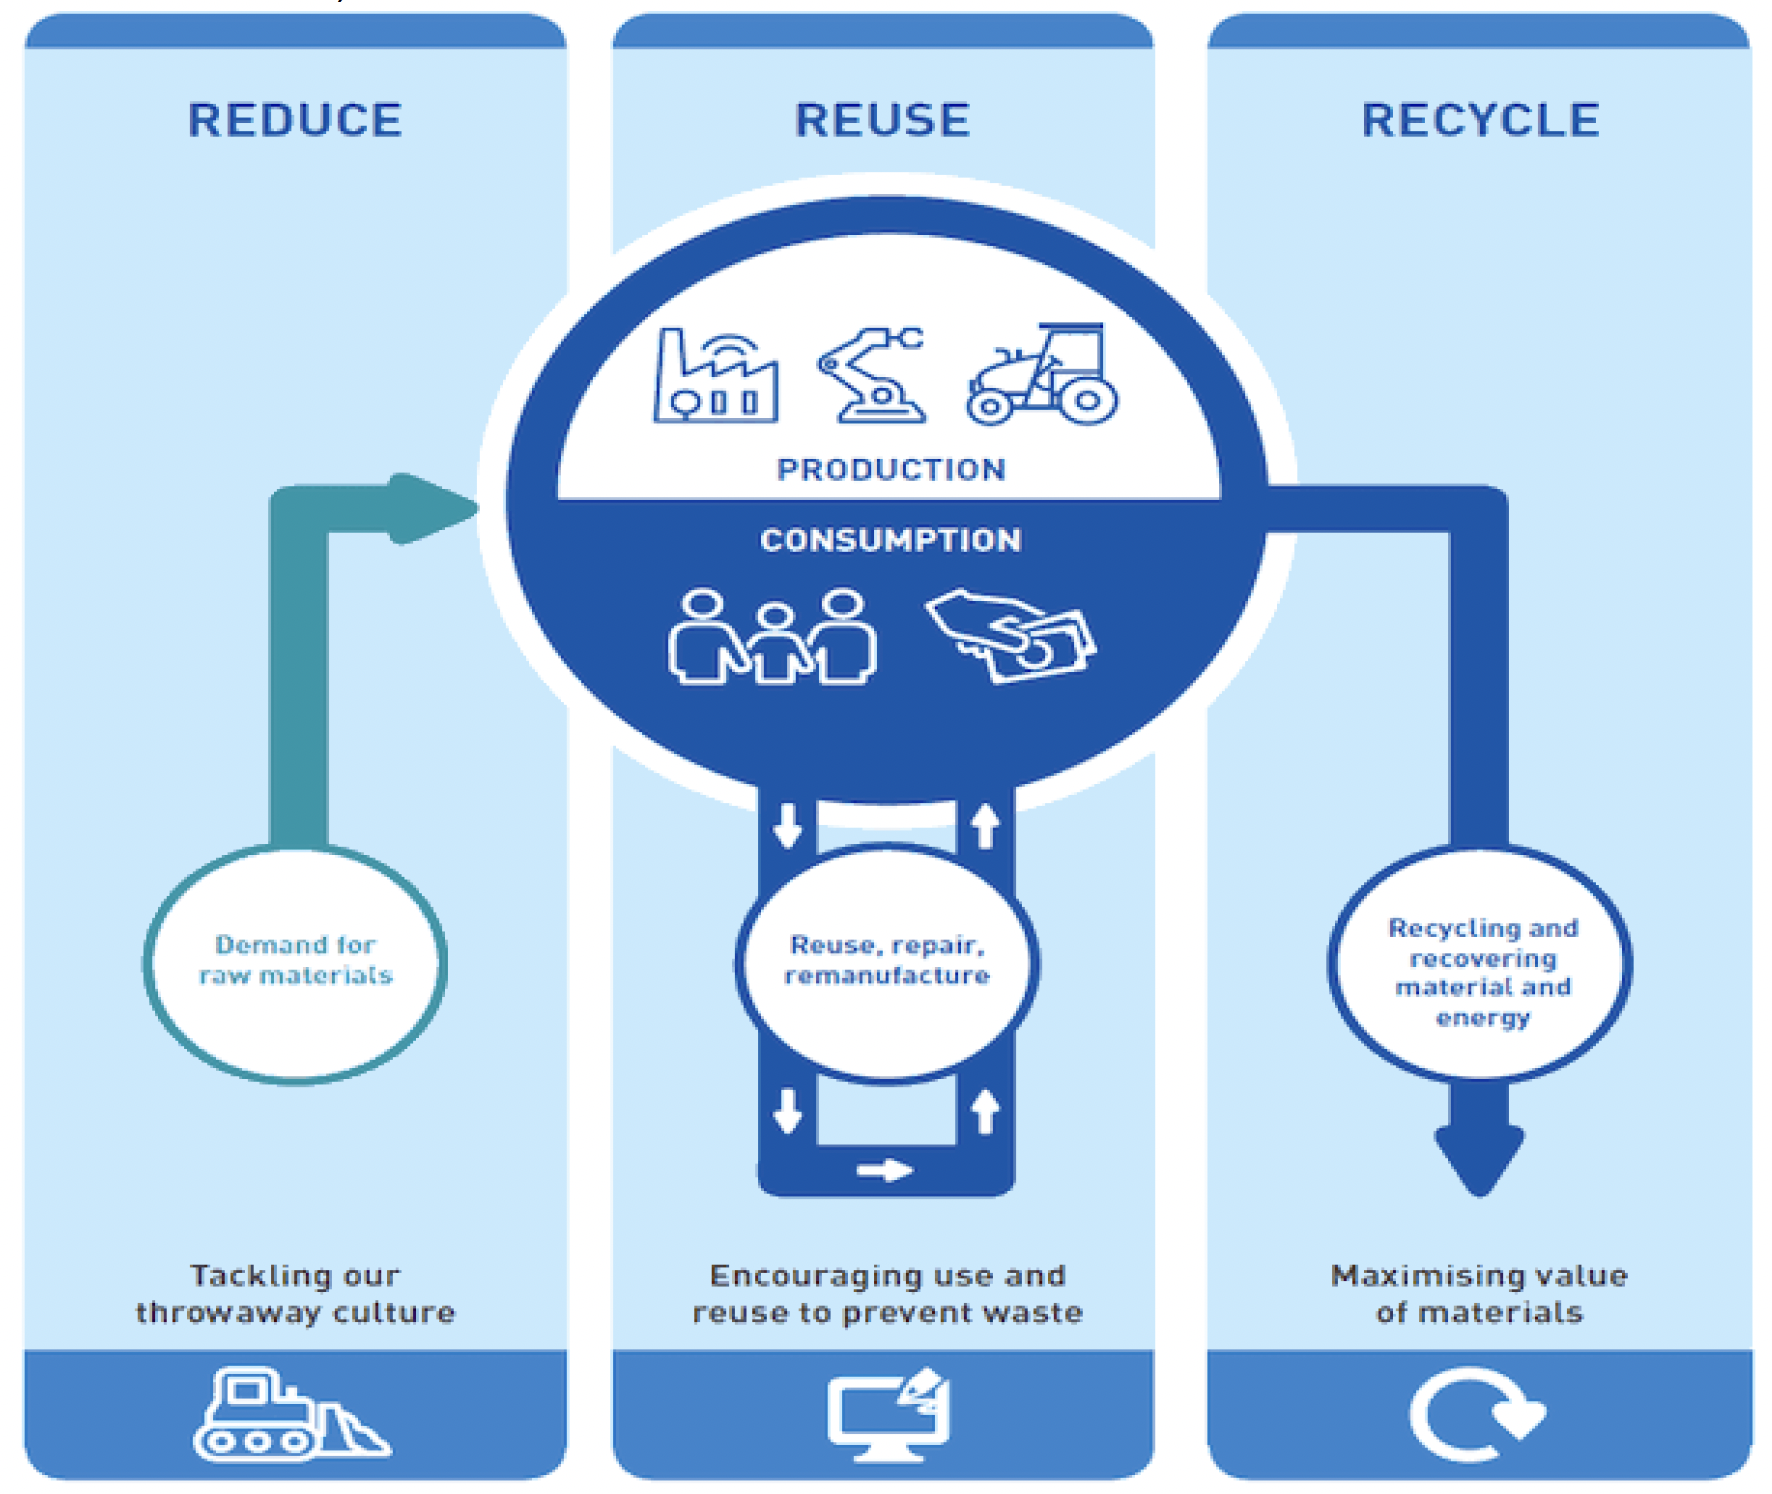 Figure 1 has been compiled by Zero Waste Scotland to depict a circular economy approach to production and consumption. It highlights the interaction between consumption reduction, reuse and recycling of material and energy as the foundation of a circular economy. 